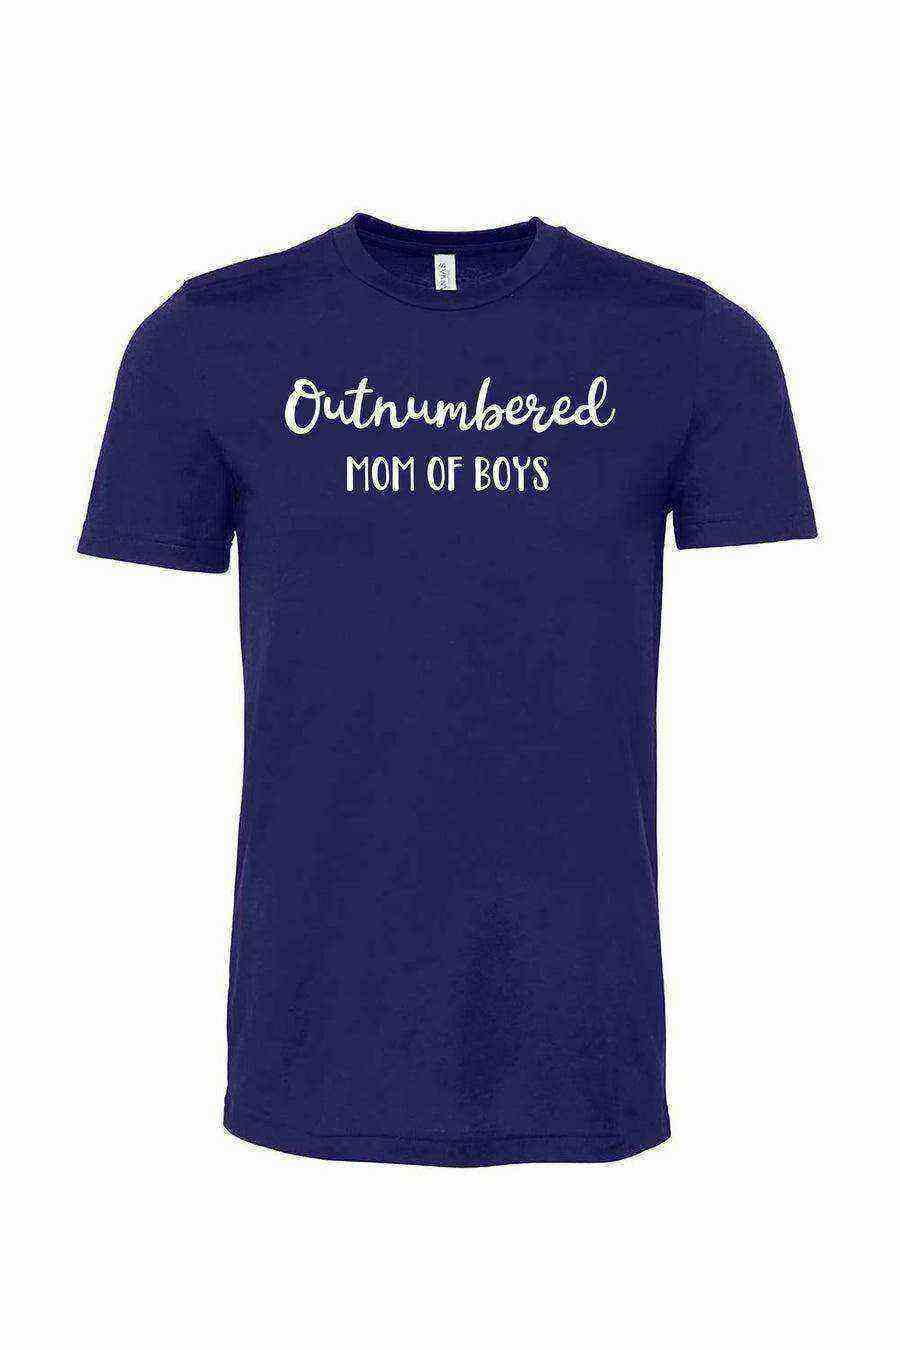 Toddler | Outnumbered Mom Of Boys Shirt - Dylan's Tees